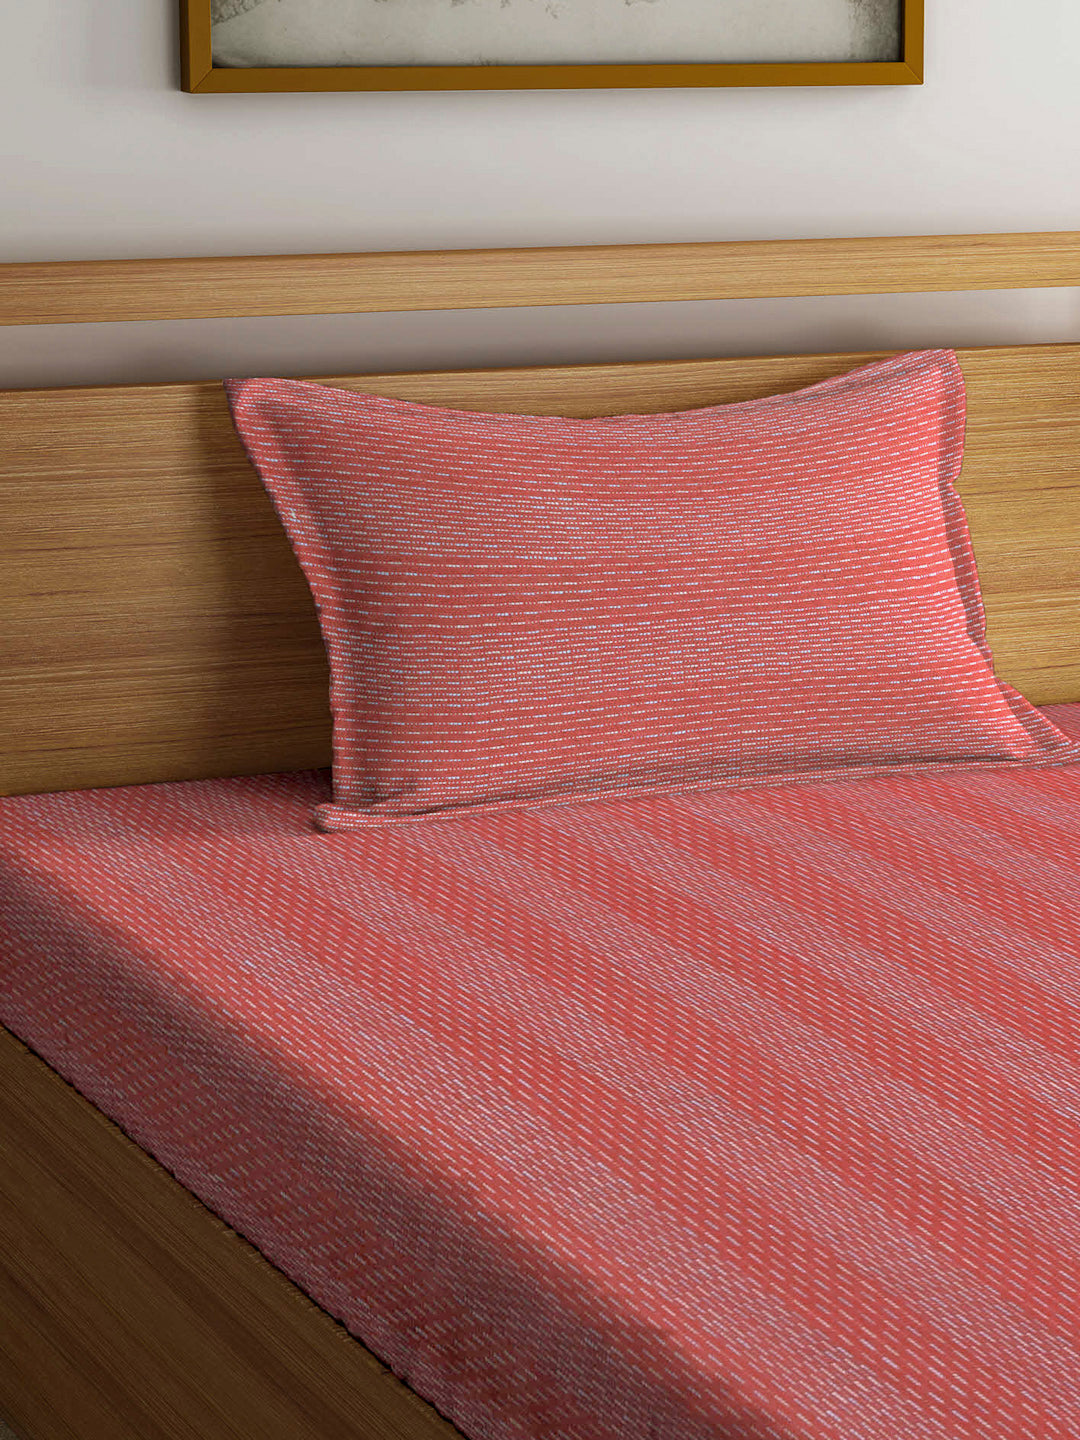 Arrabi Brown Stripes Handwoven Cotton Single Size Bedsheet with 1 Pillow Cover (230 x 150 cm)